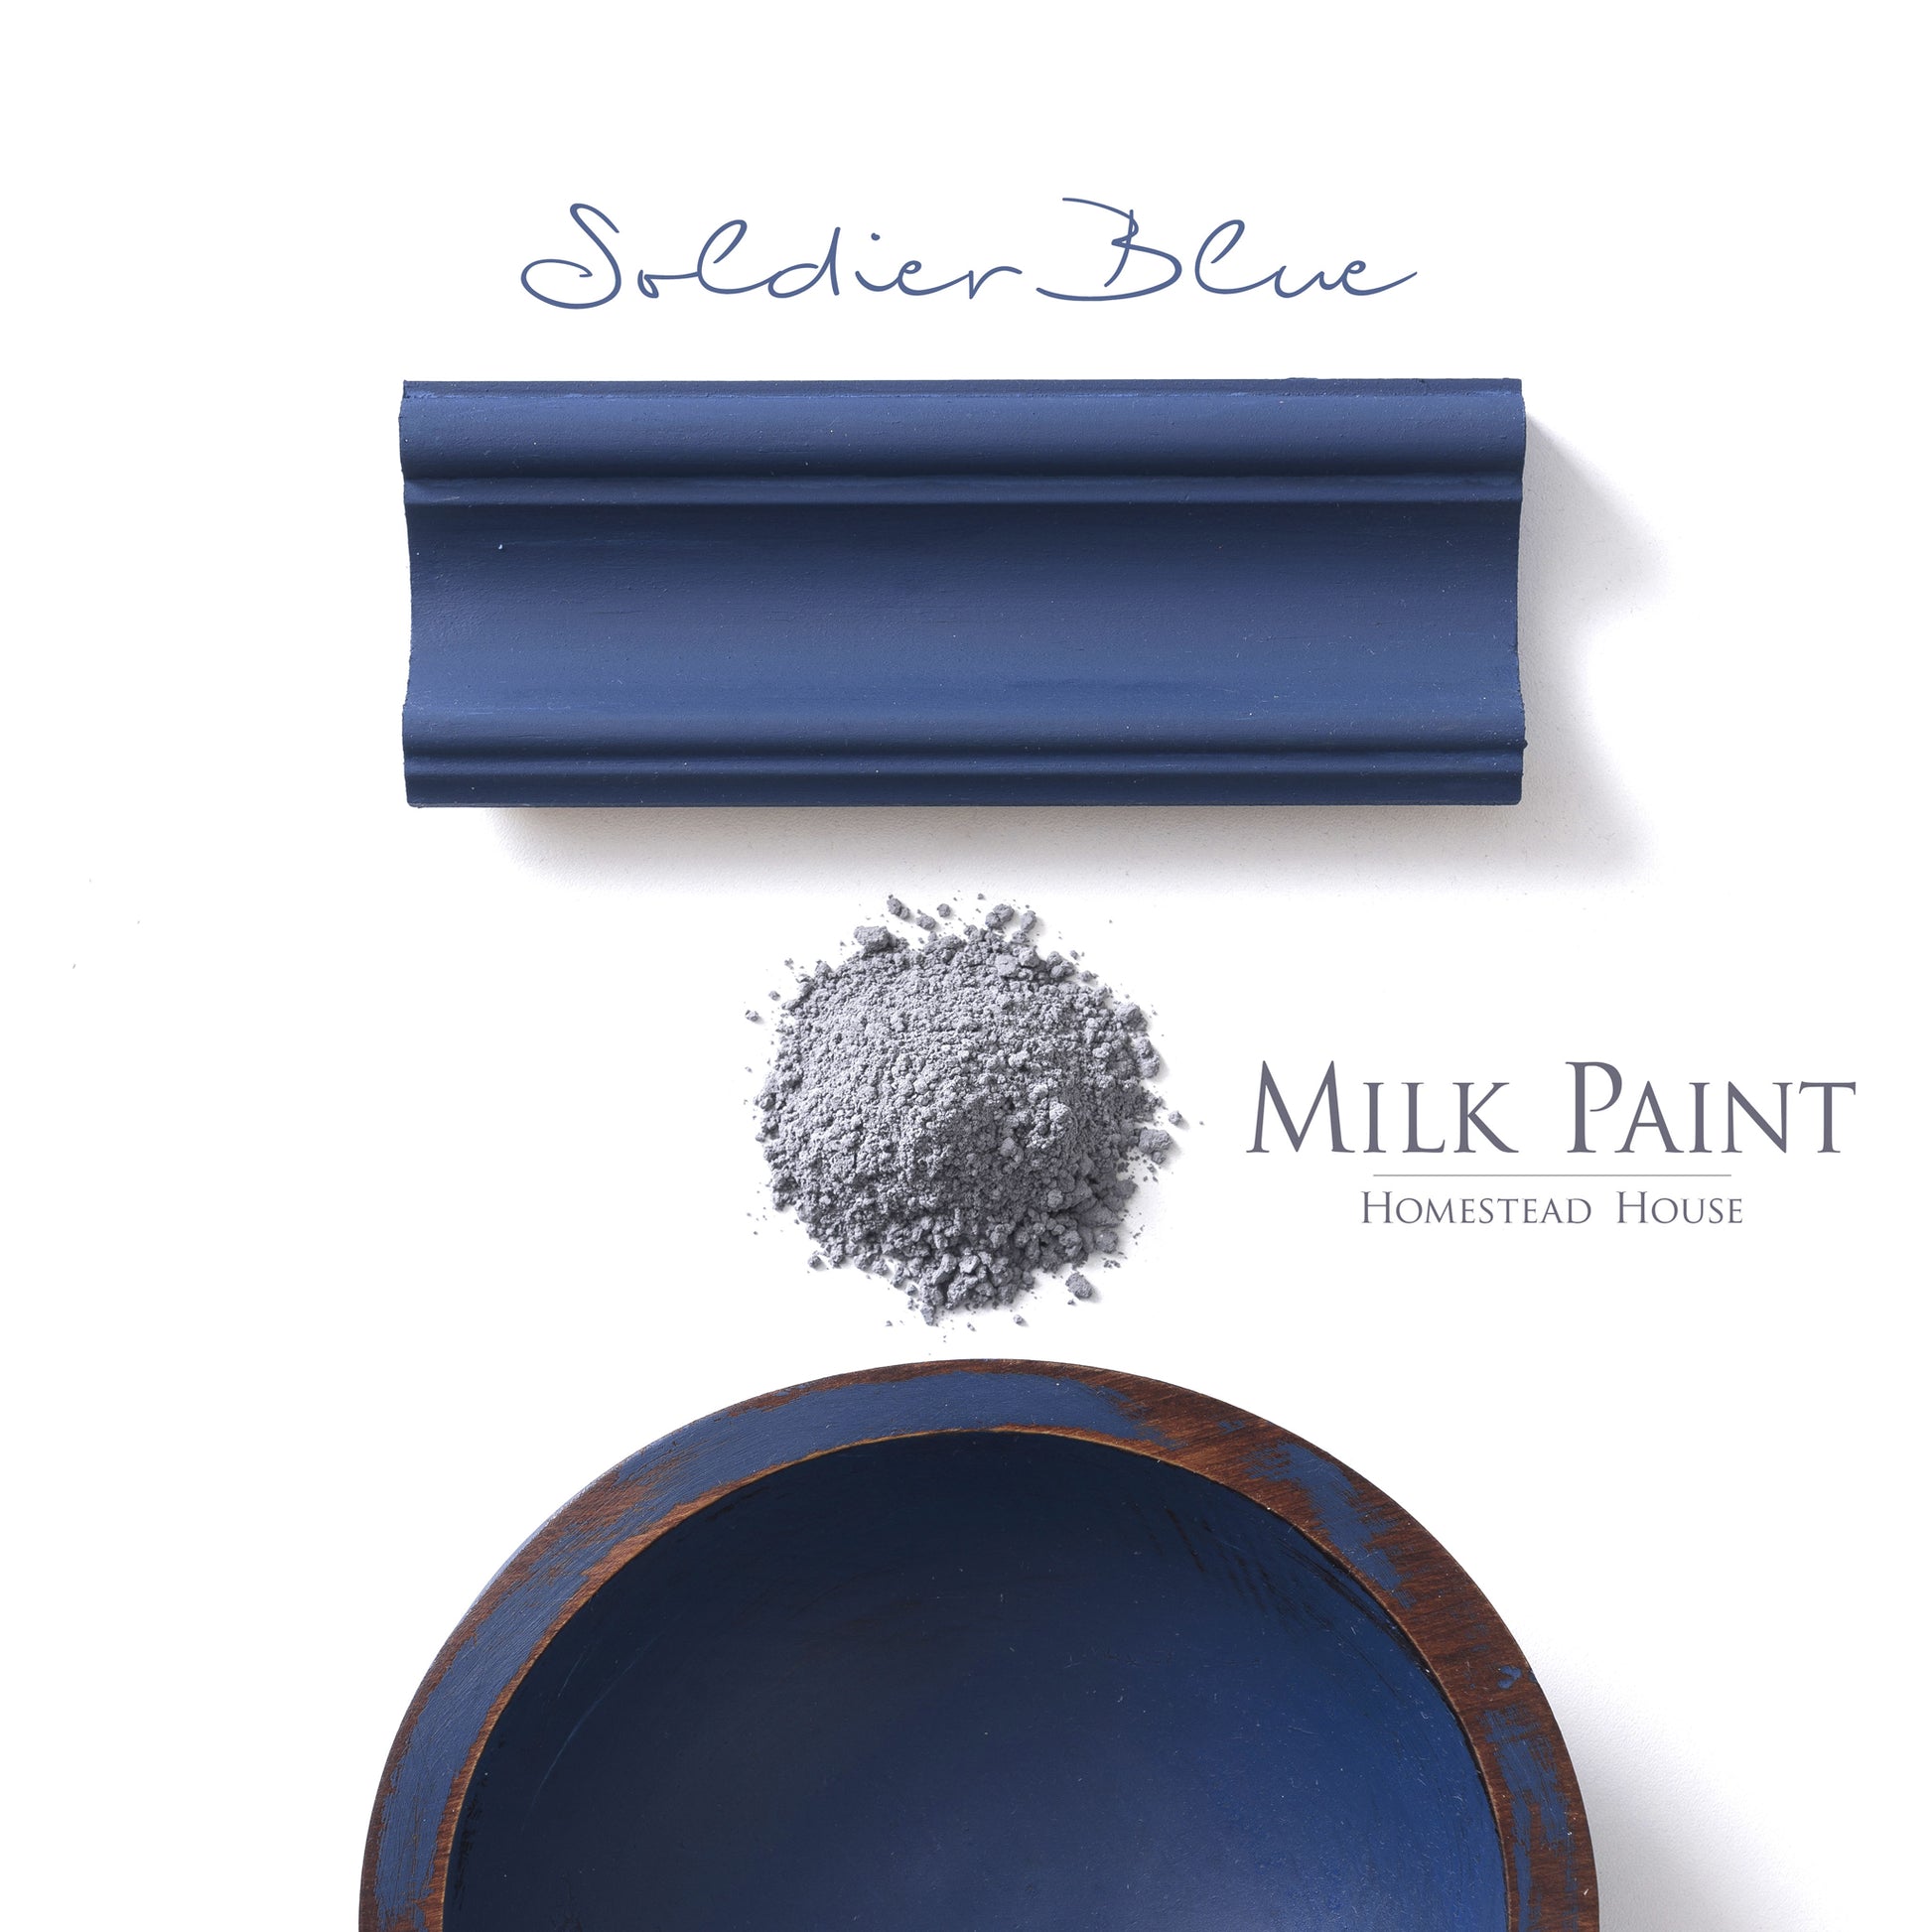 Milk Paint from Homestead House in Soldier Blue - Deep rich true blue with a hint of black. | homesteadhouse.ca